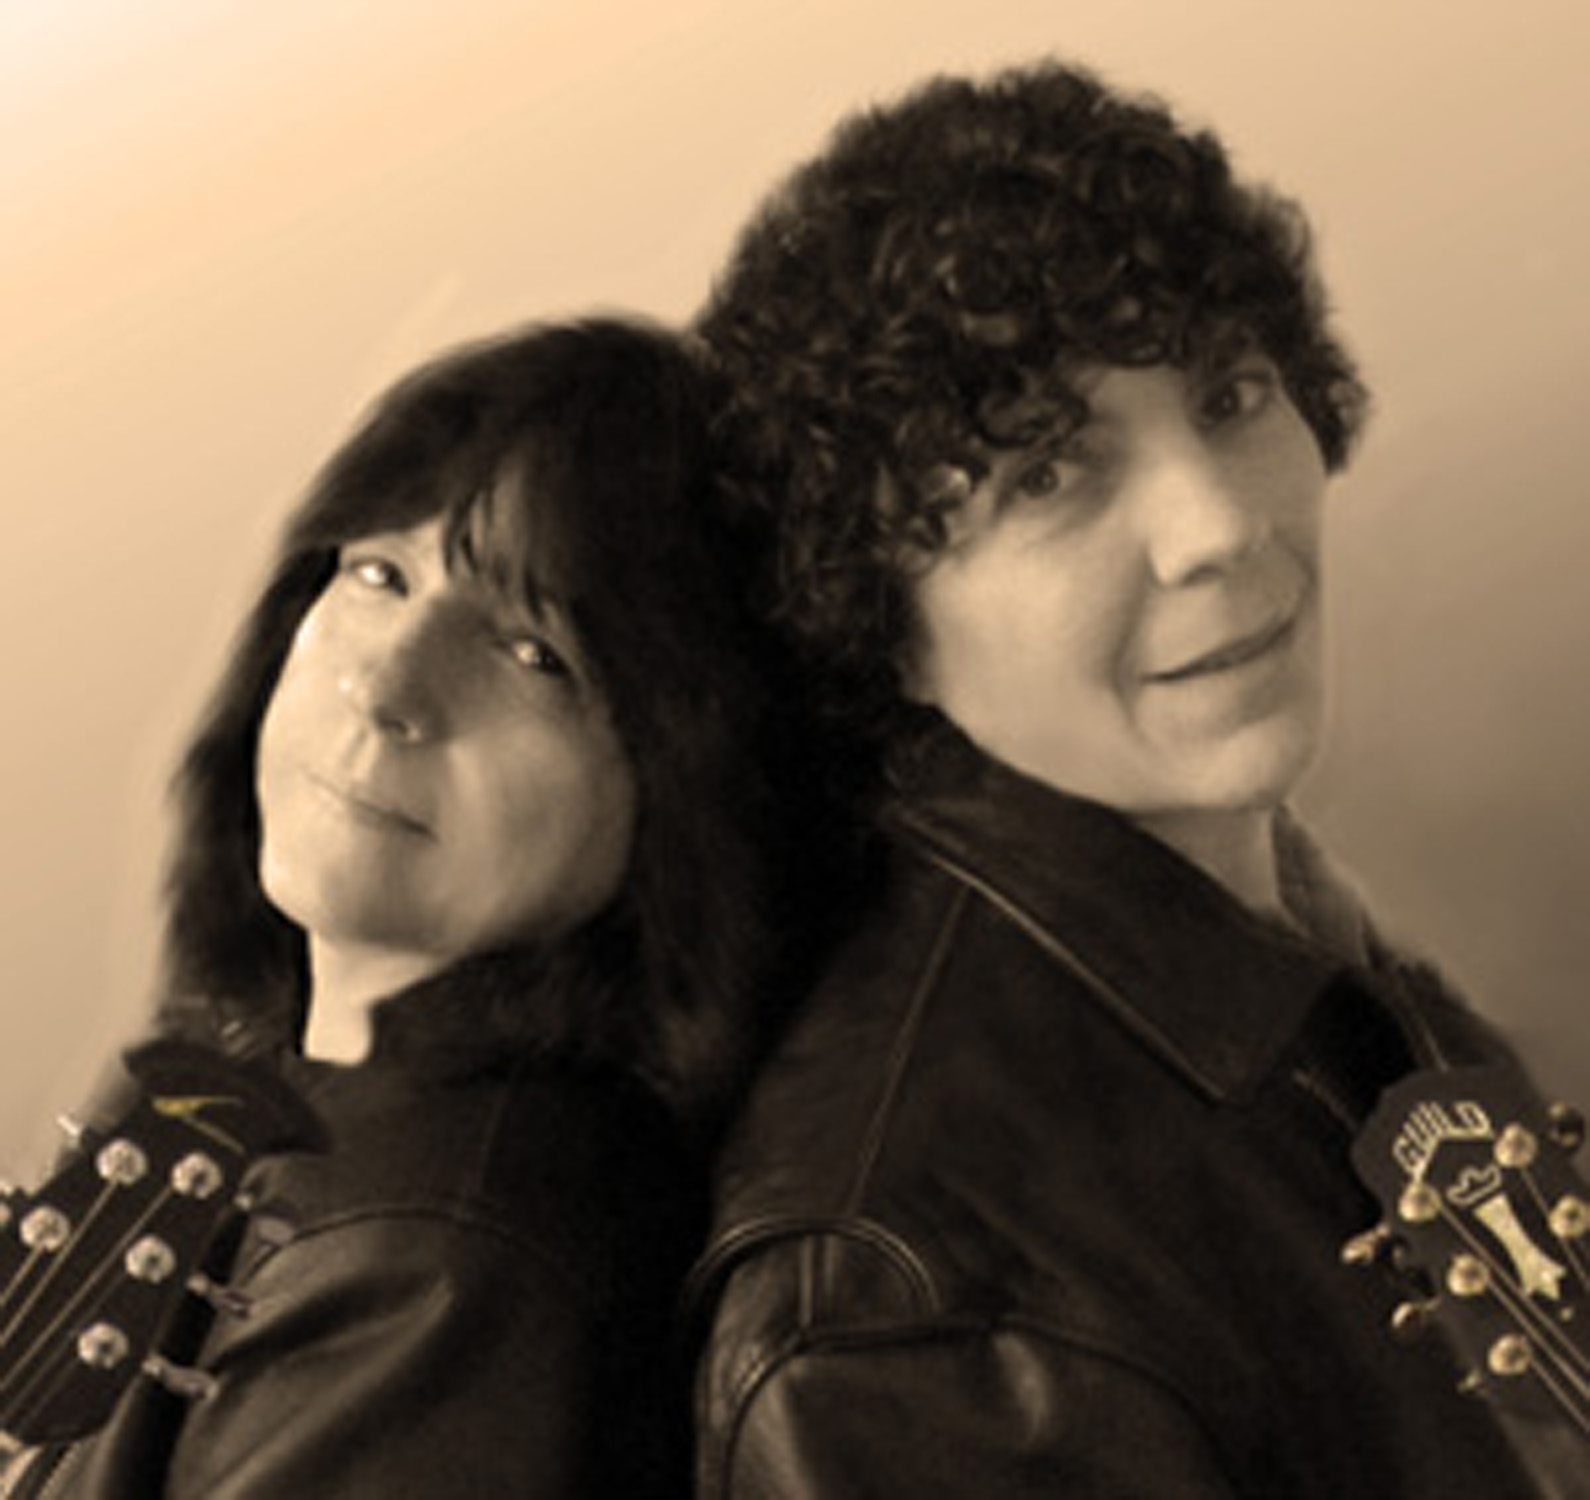 Ditto, Award Winning Acoustic Duo playing music to recharge your soul!